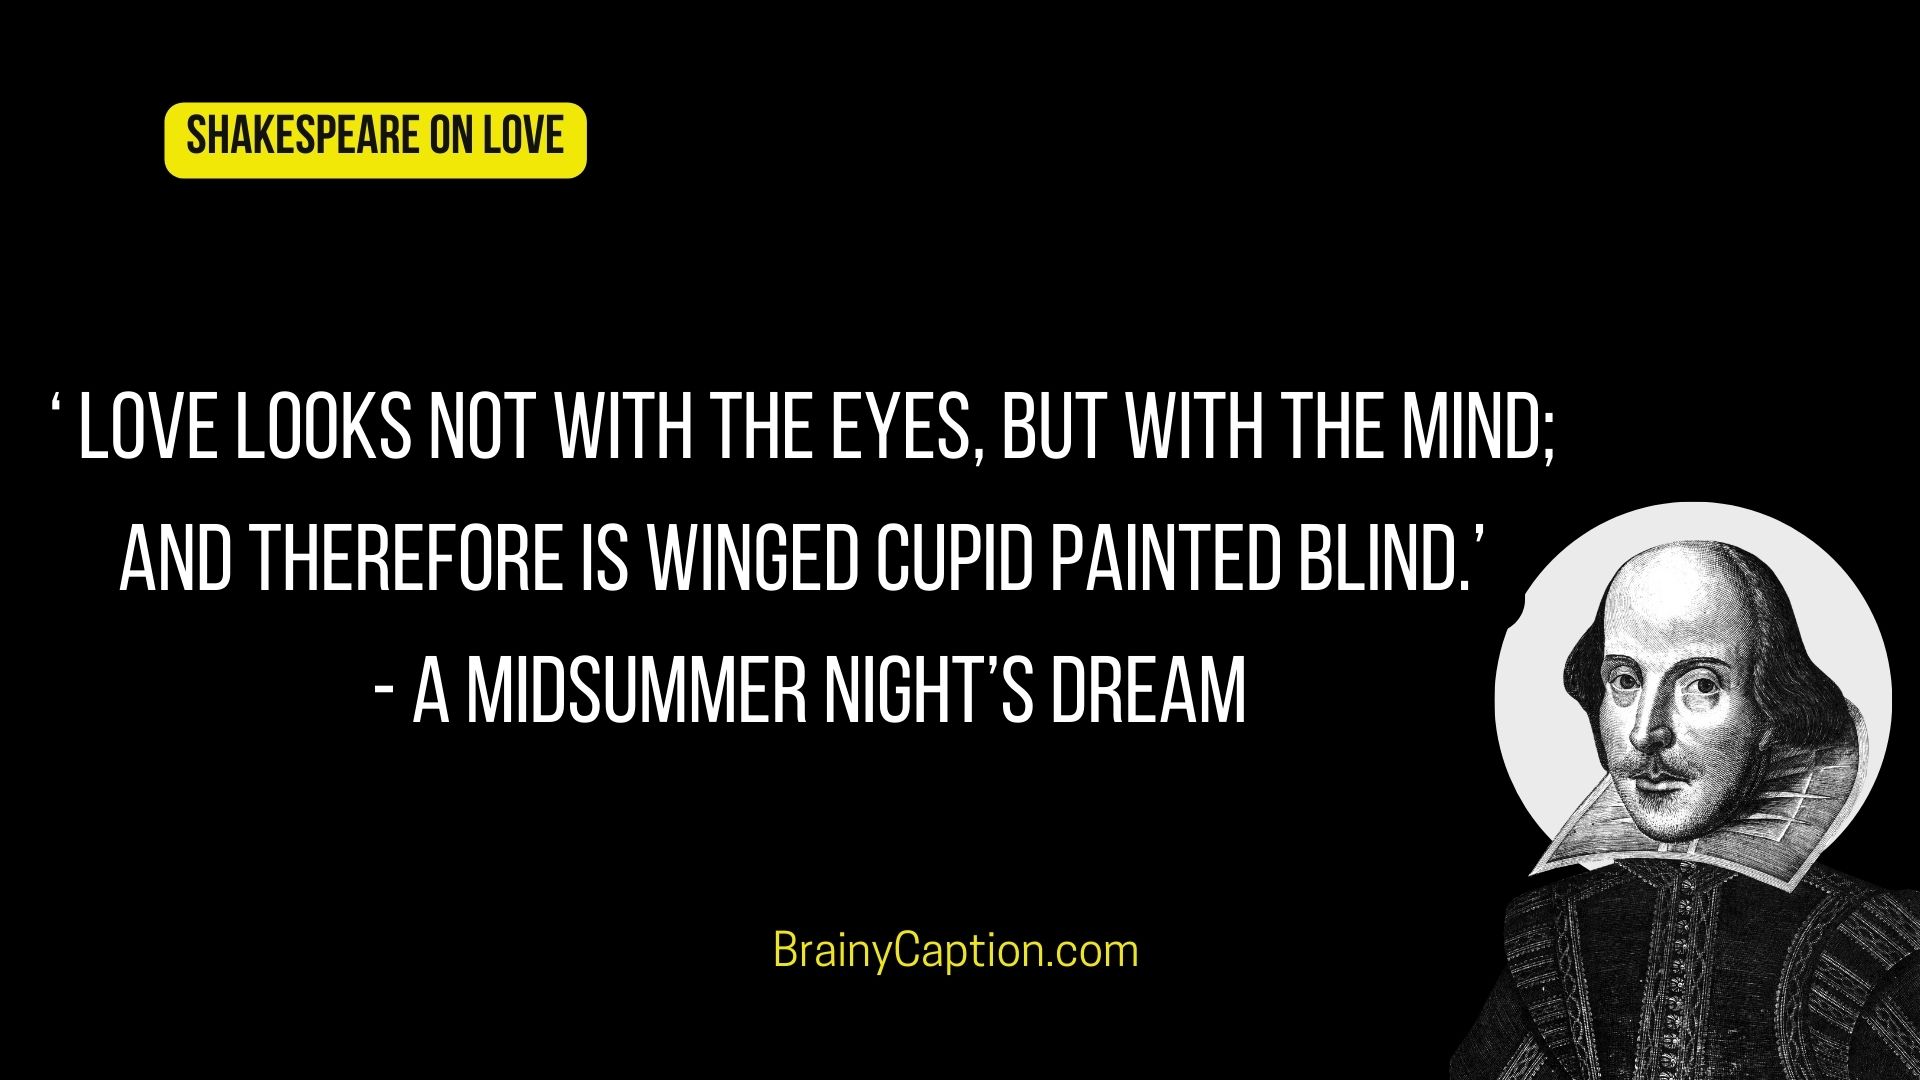 William Shakespeare quotes on love from a midsummer night's dream